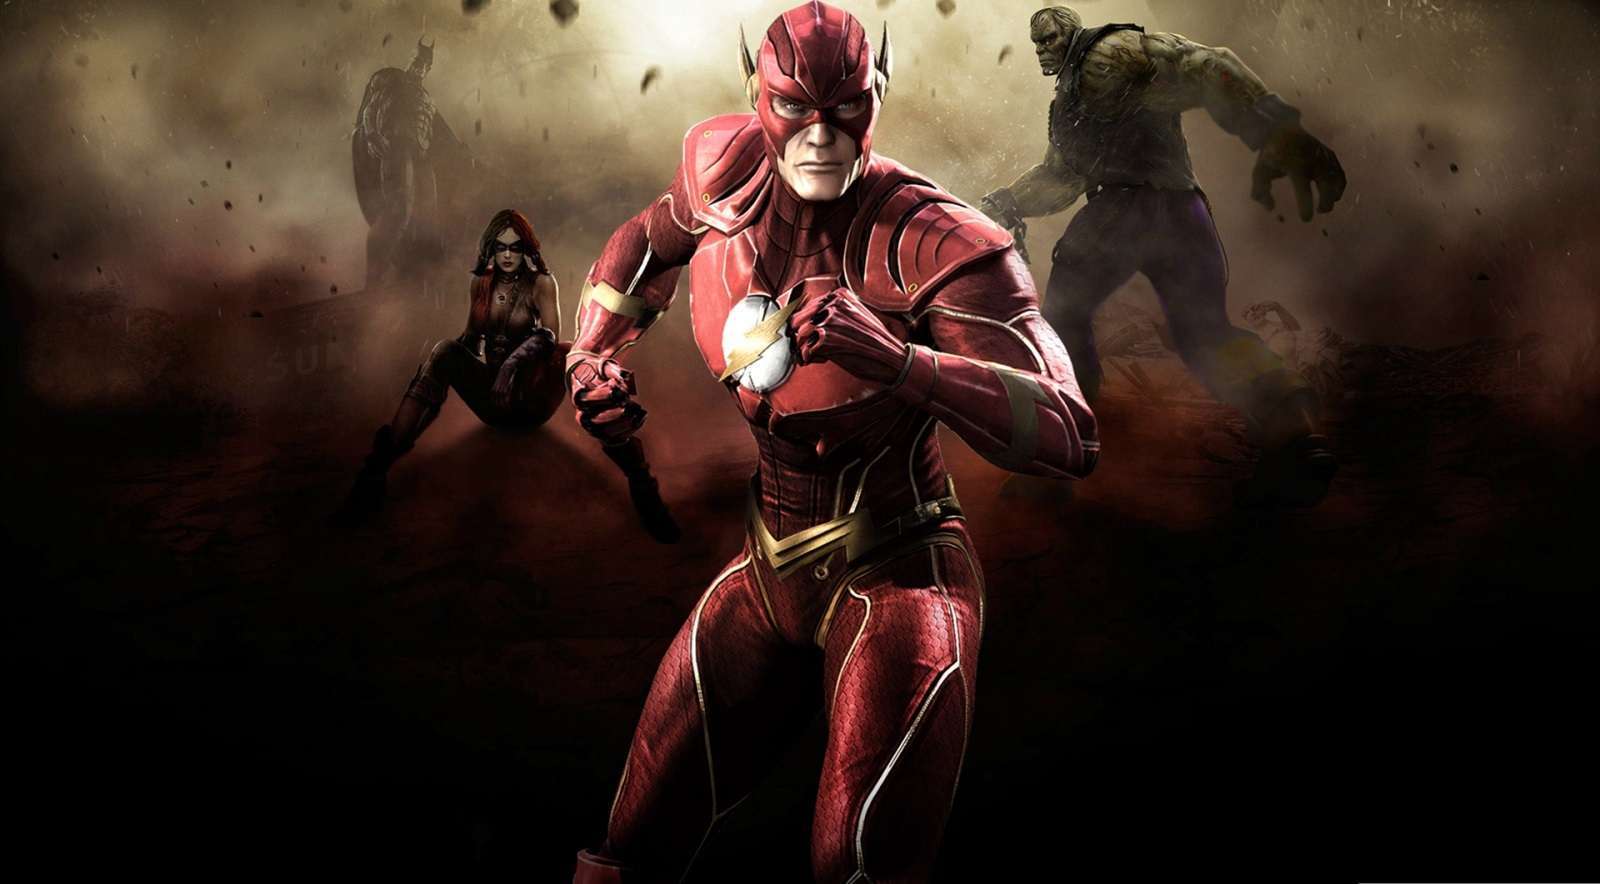 The Flash (2014) Wallpaper and Background Image